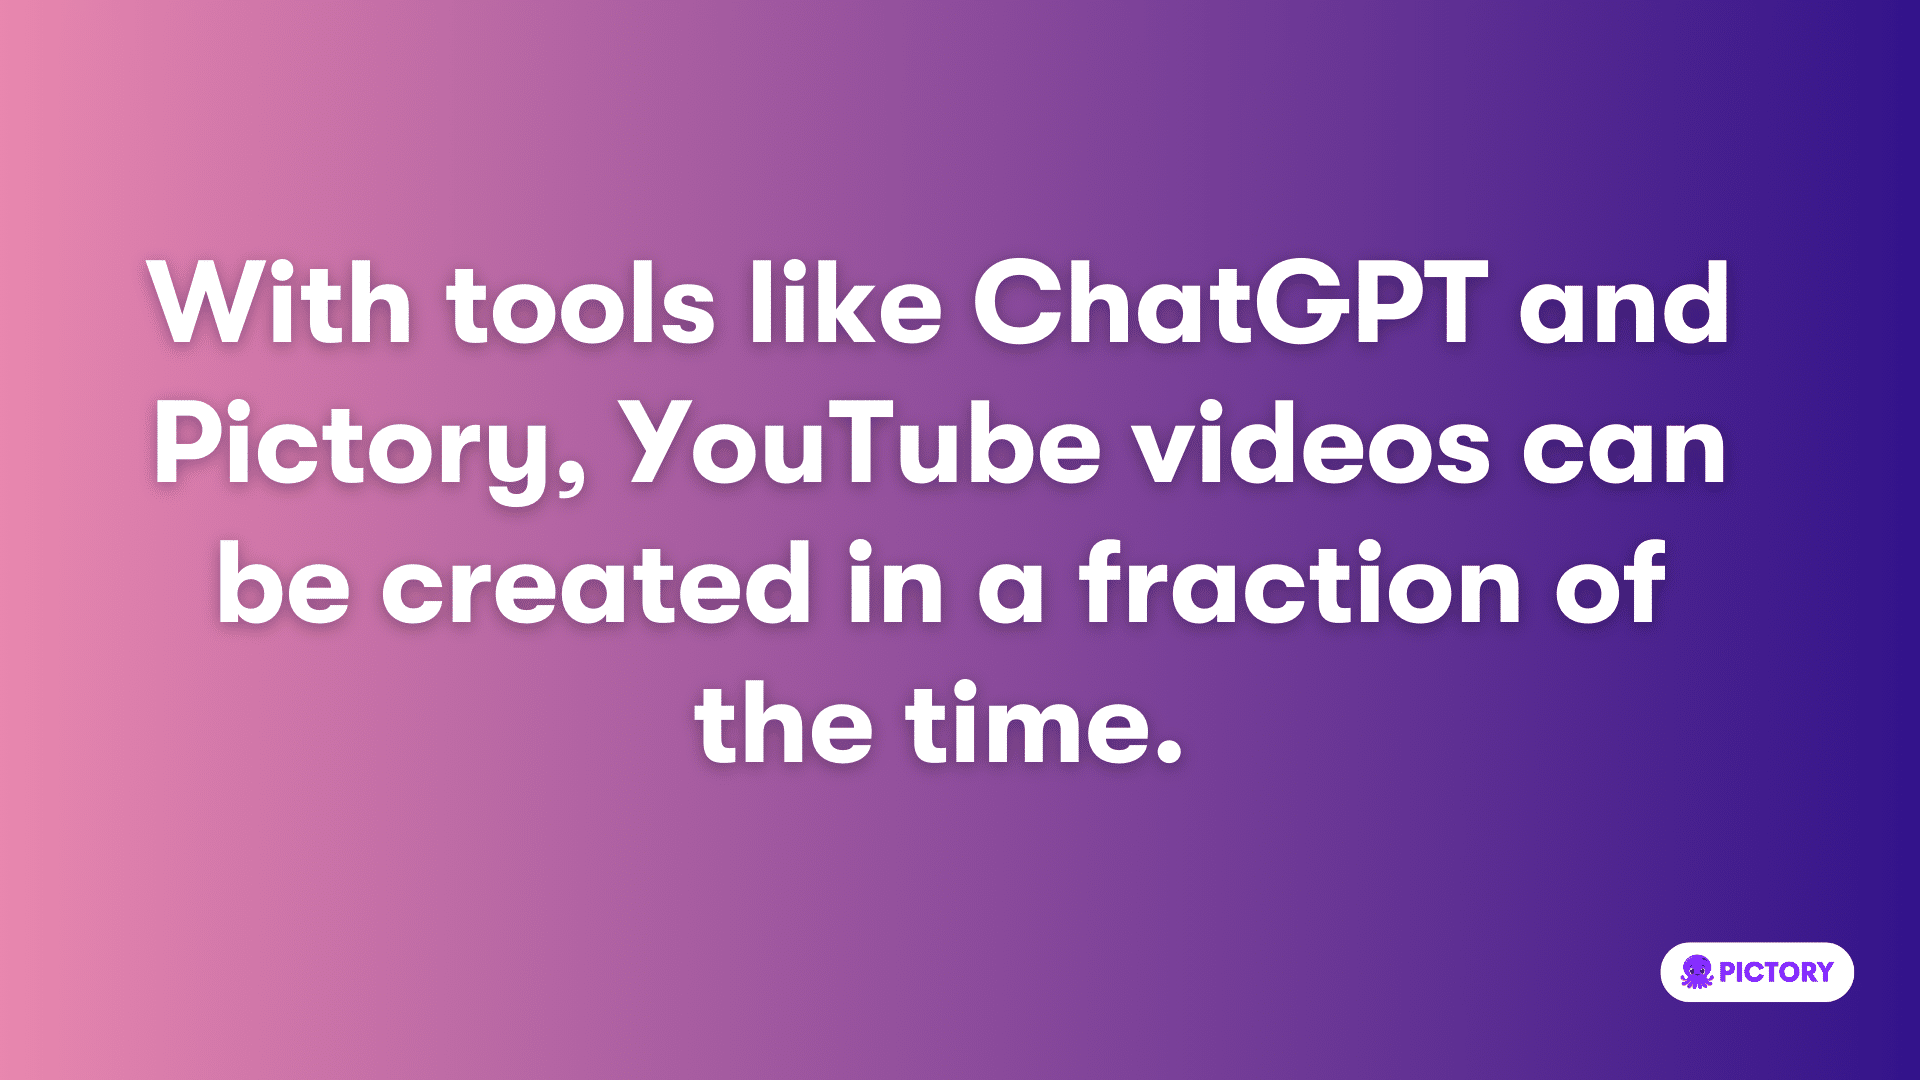 quote - with tools like ChatGPT and Pictory, YouTube videos can be created in a fraction of the time.